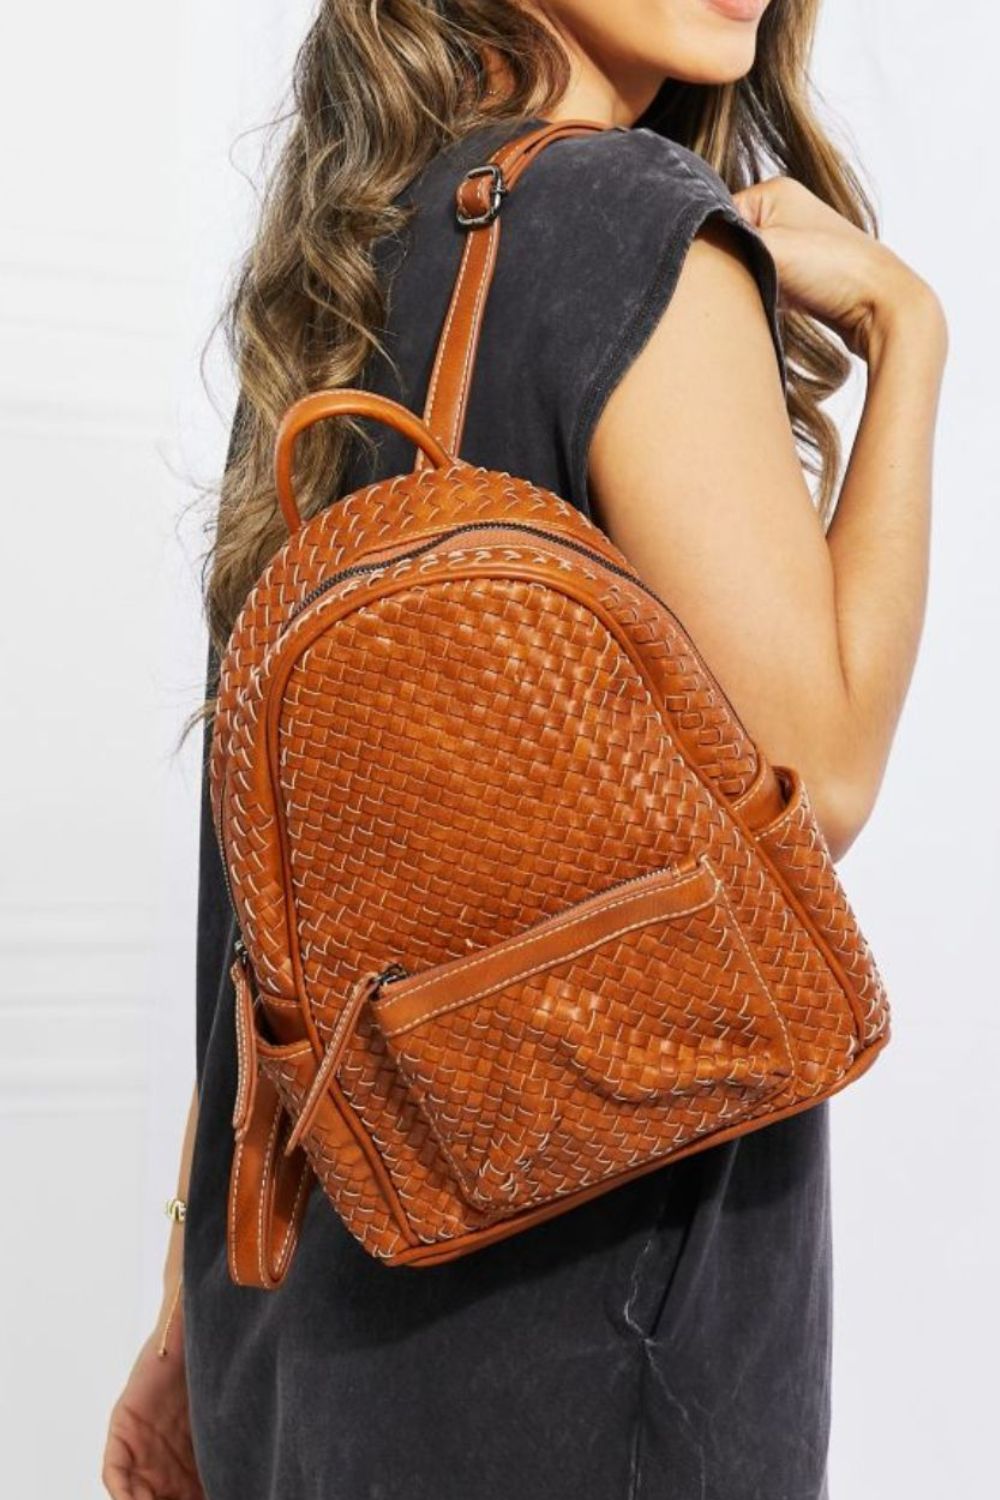 SHOMICO Certainly Chic Faux Leather Woven Backpack - Tigbul's Fashion